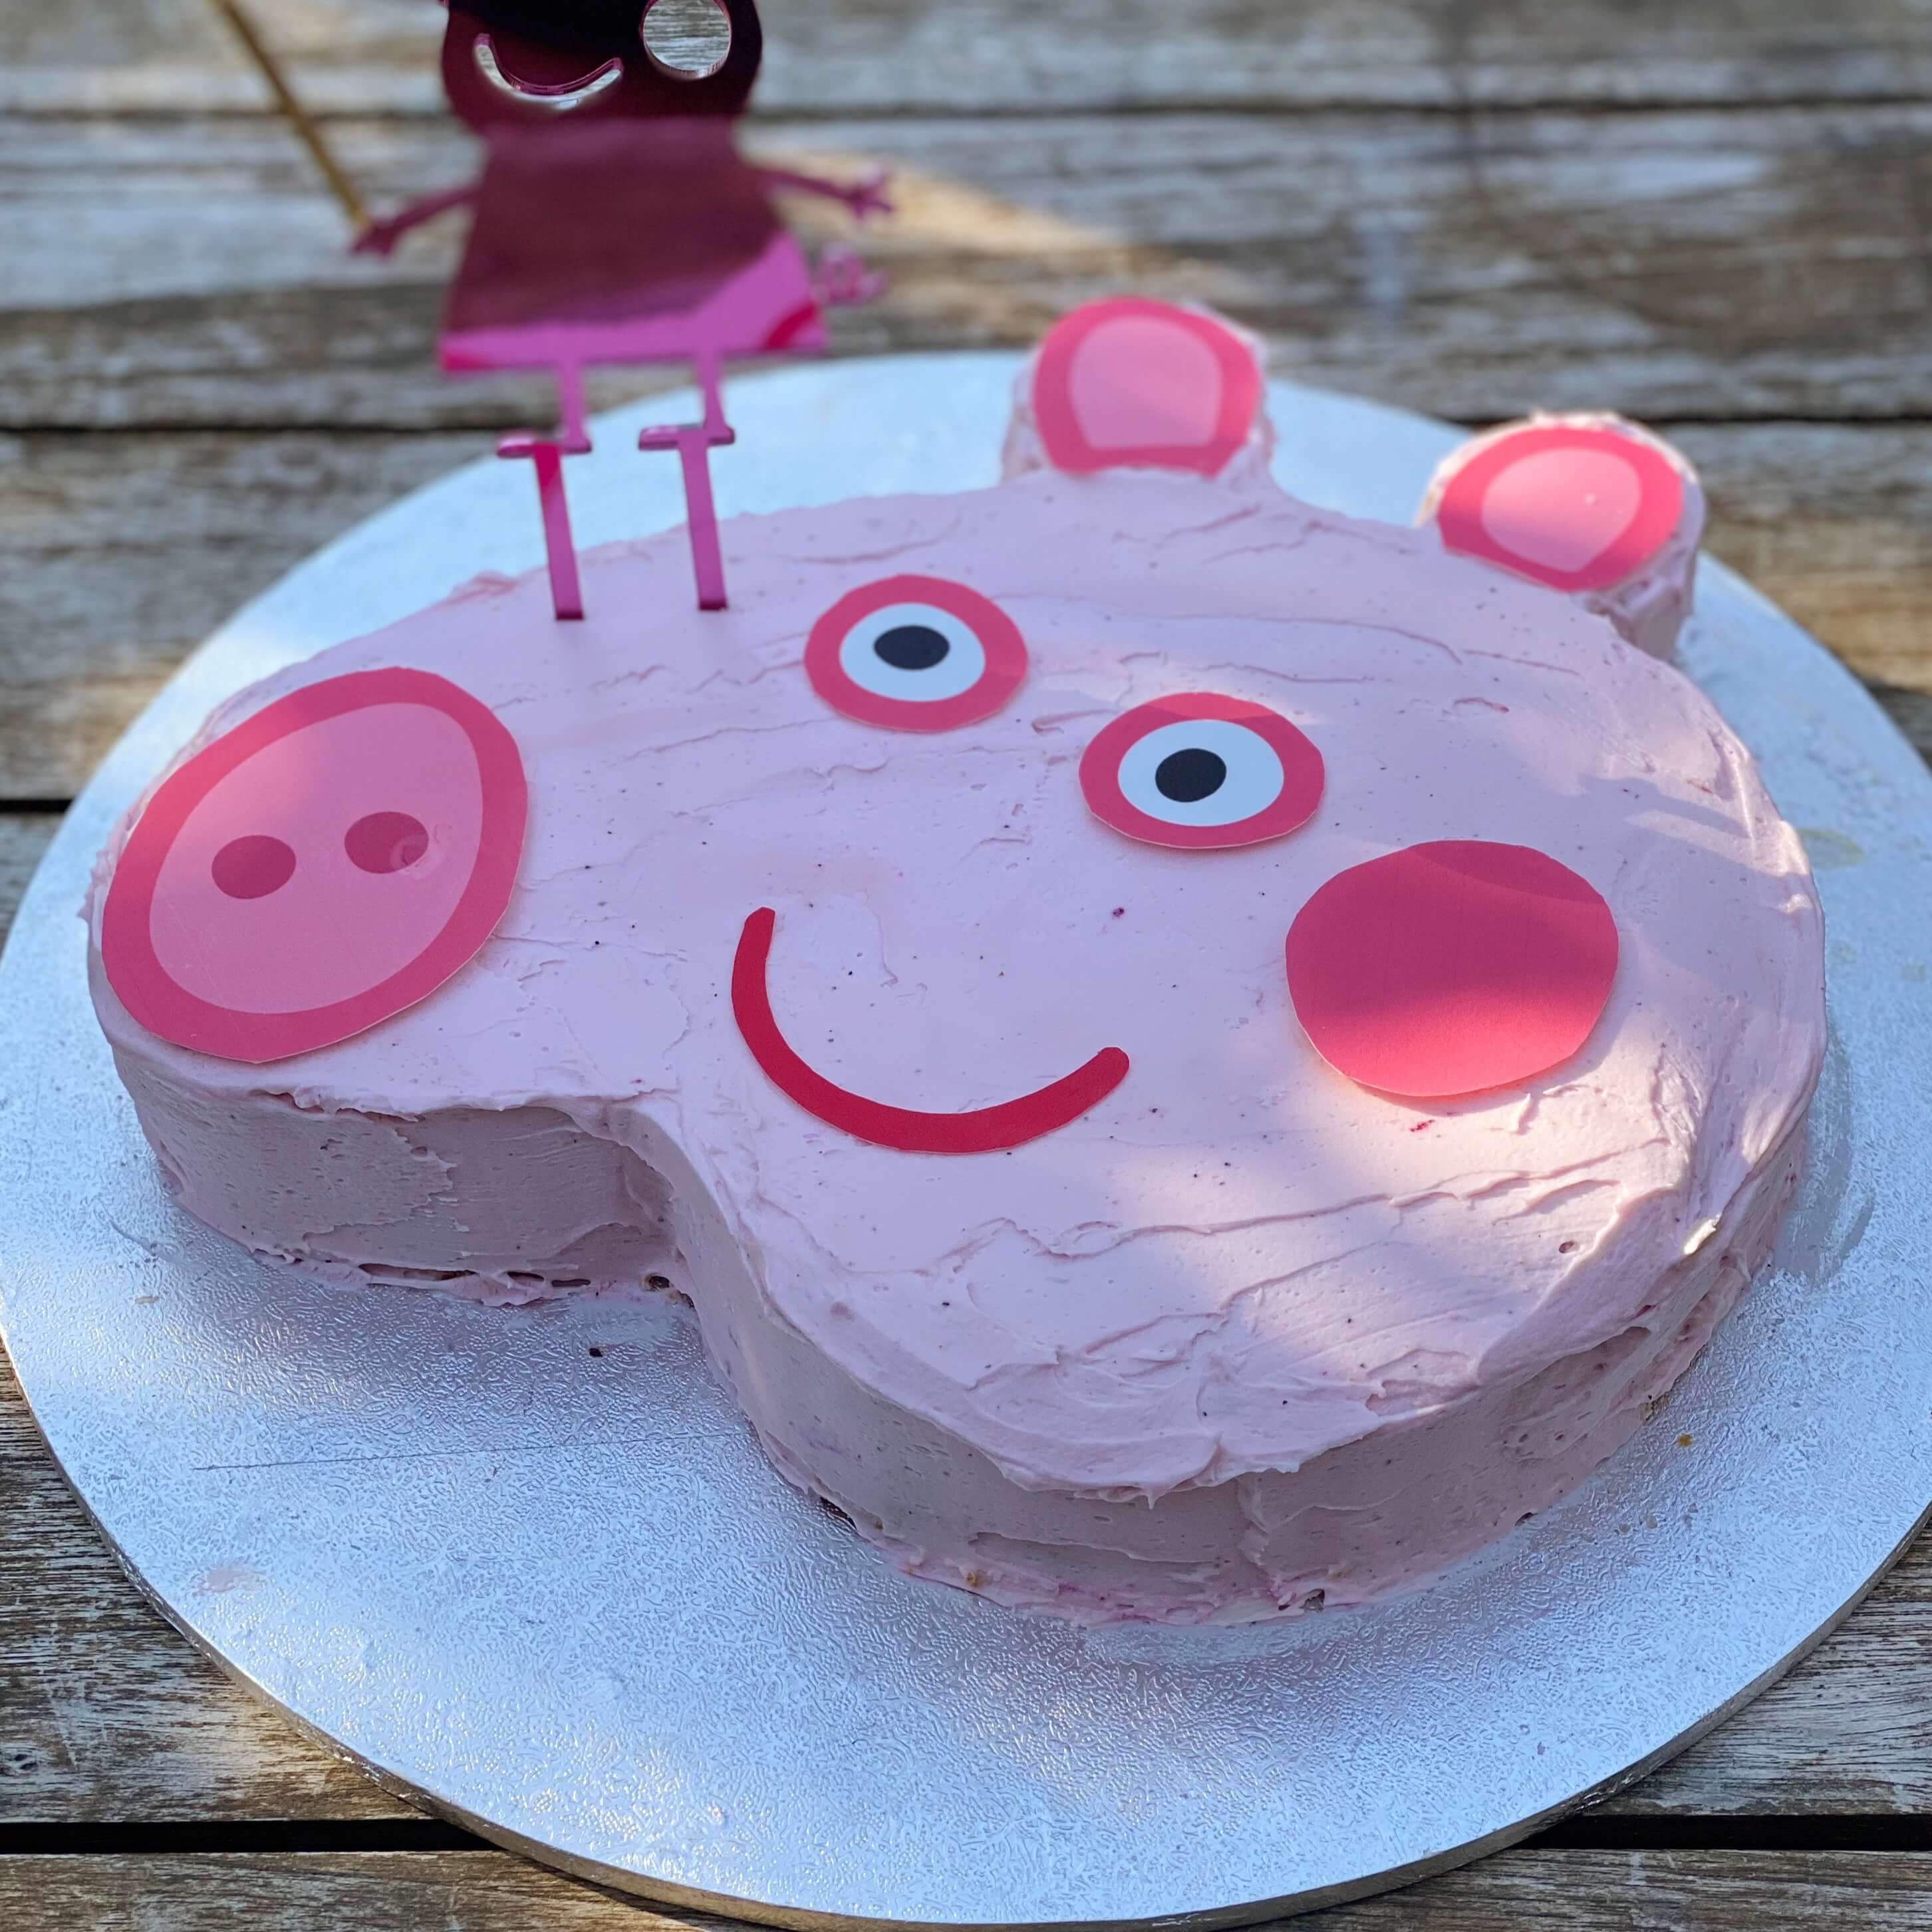 50 Best Birthday Cake Ideas in 2022 : Two-Tiered Peppa Pig Cake